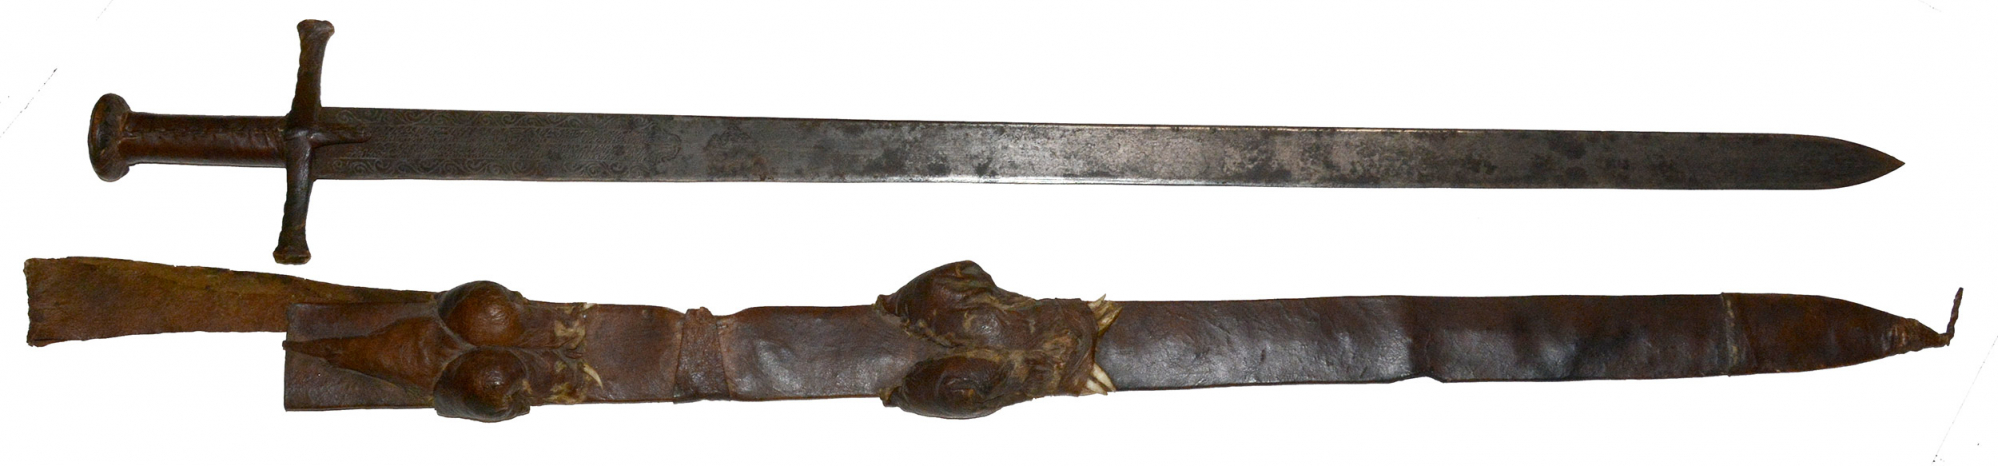 MUSEUM QUALITY 19TH CENTURY OR EARLIER SUDANESE KASKARA BROADSWORD WITH A SOLINGEN BLADE